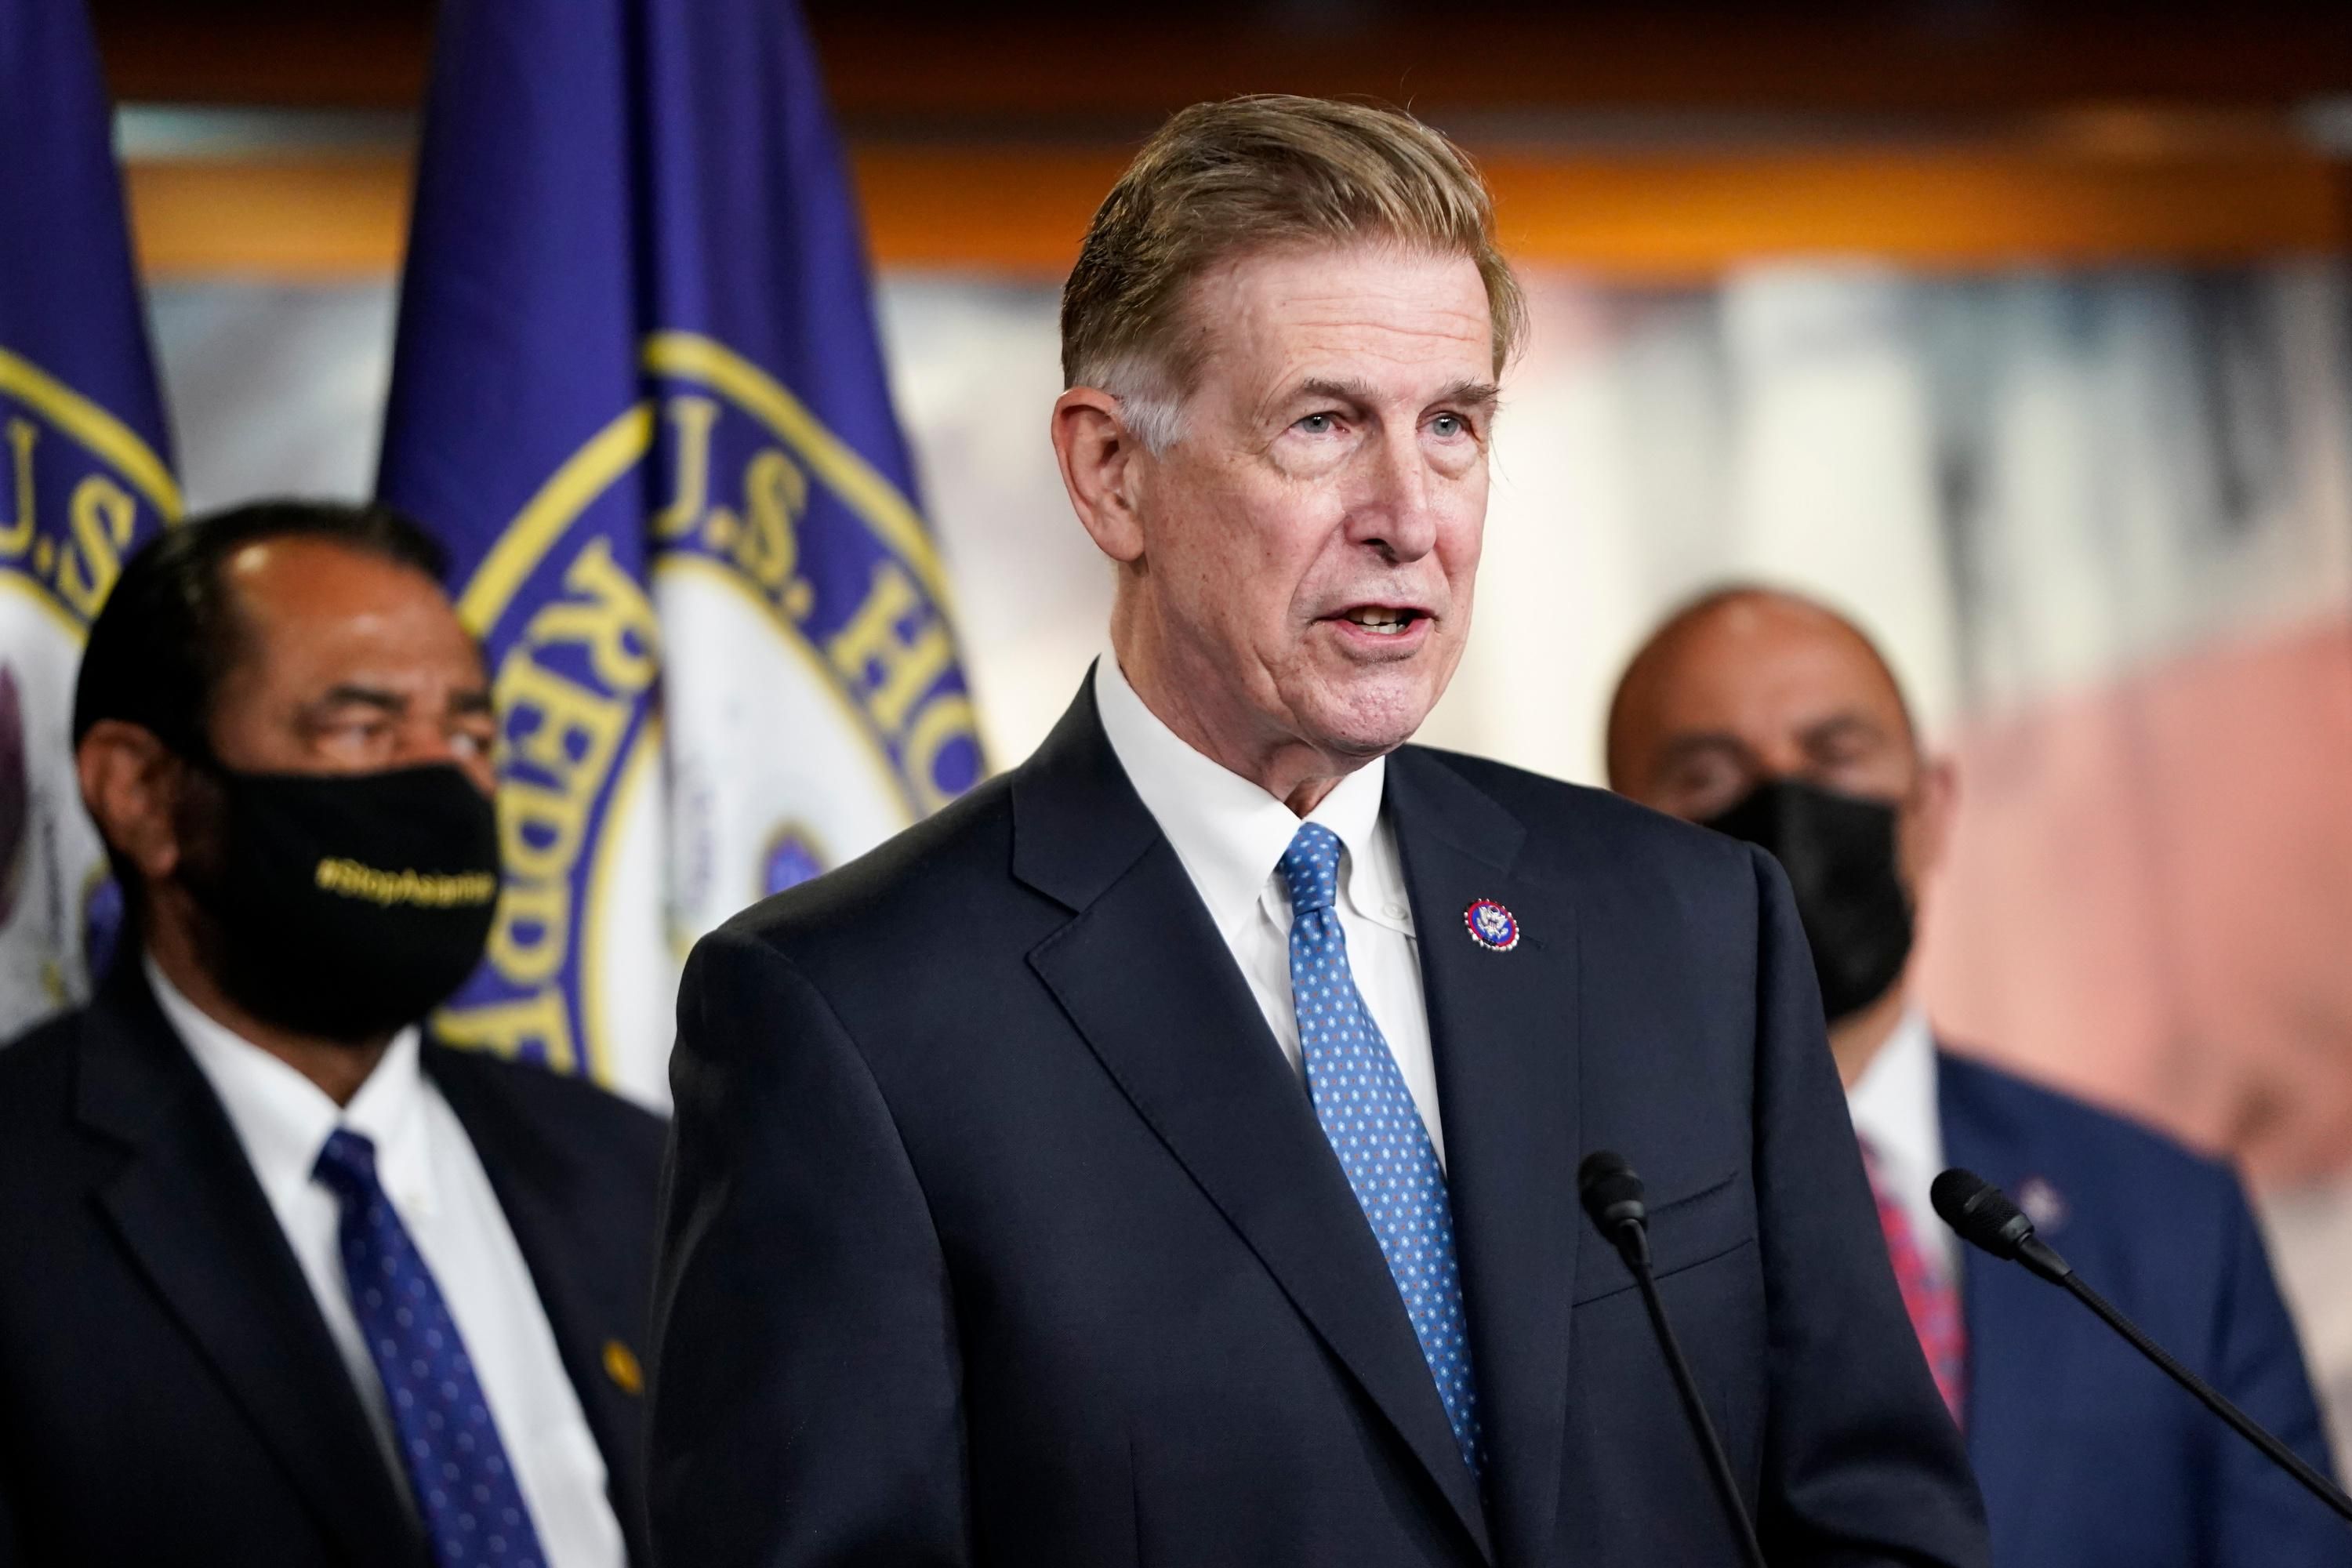 Rep. Don Beyer speaks at a press conference